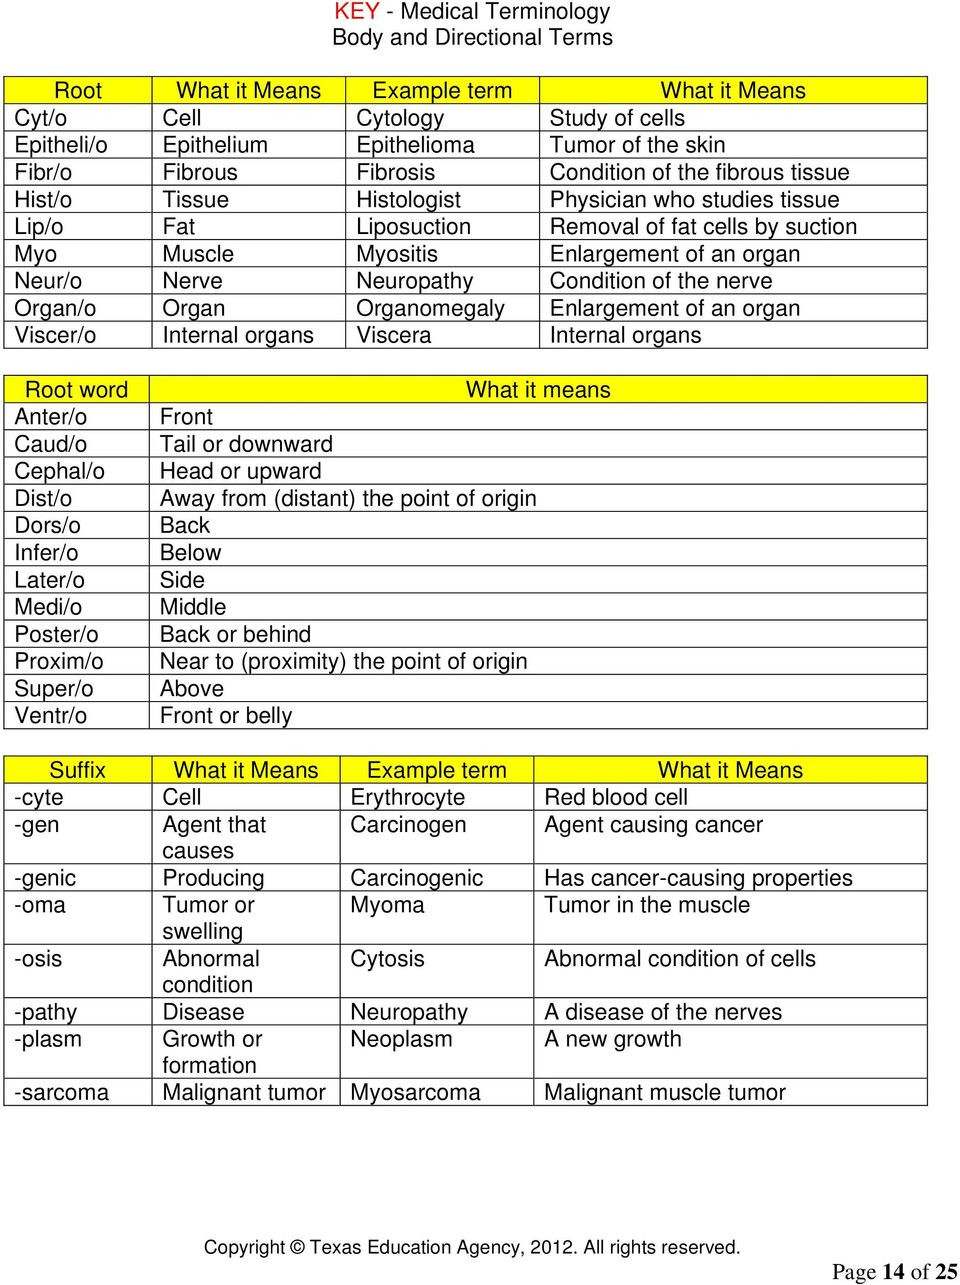 Anatomical Terms Worksheet Answers General Body and Directional Terms Pdf Free Download